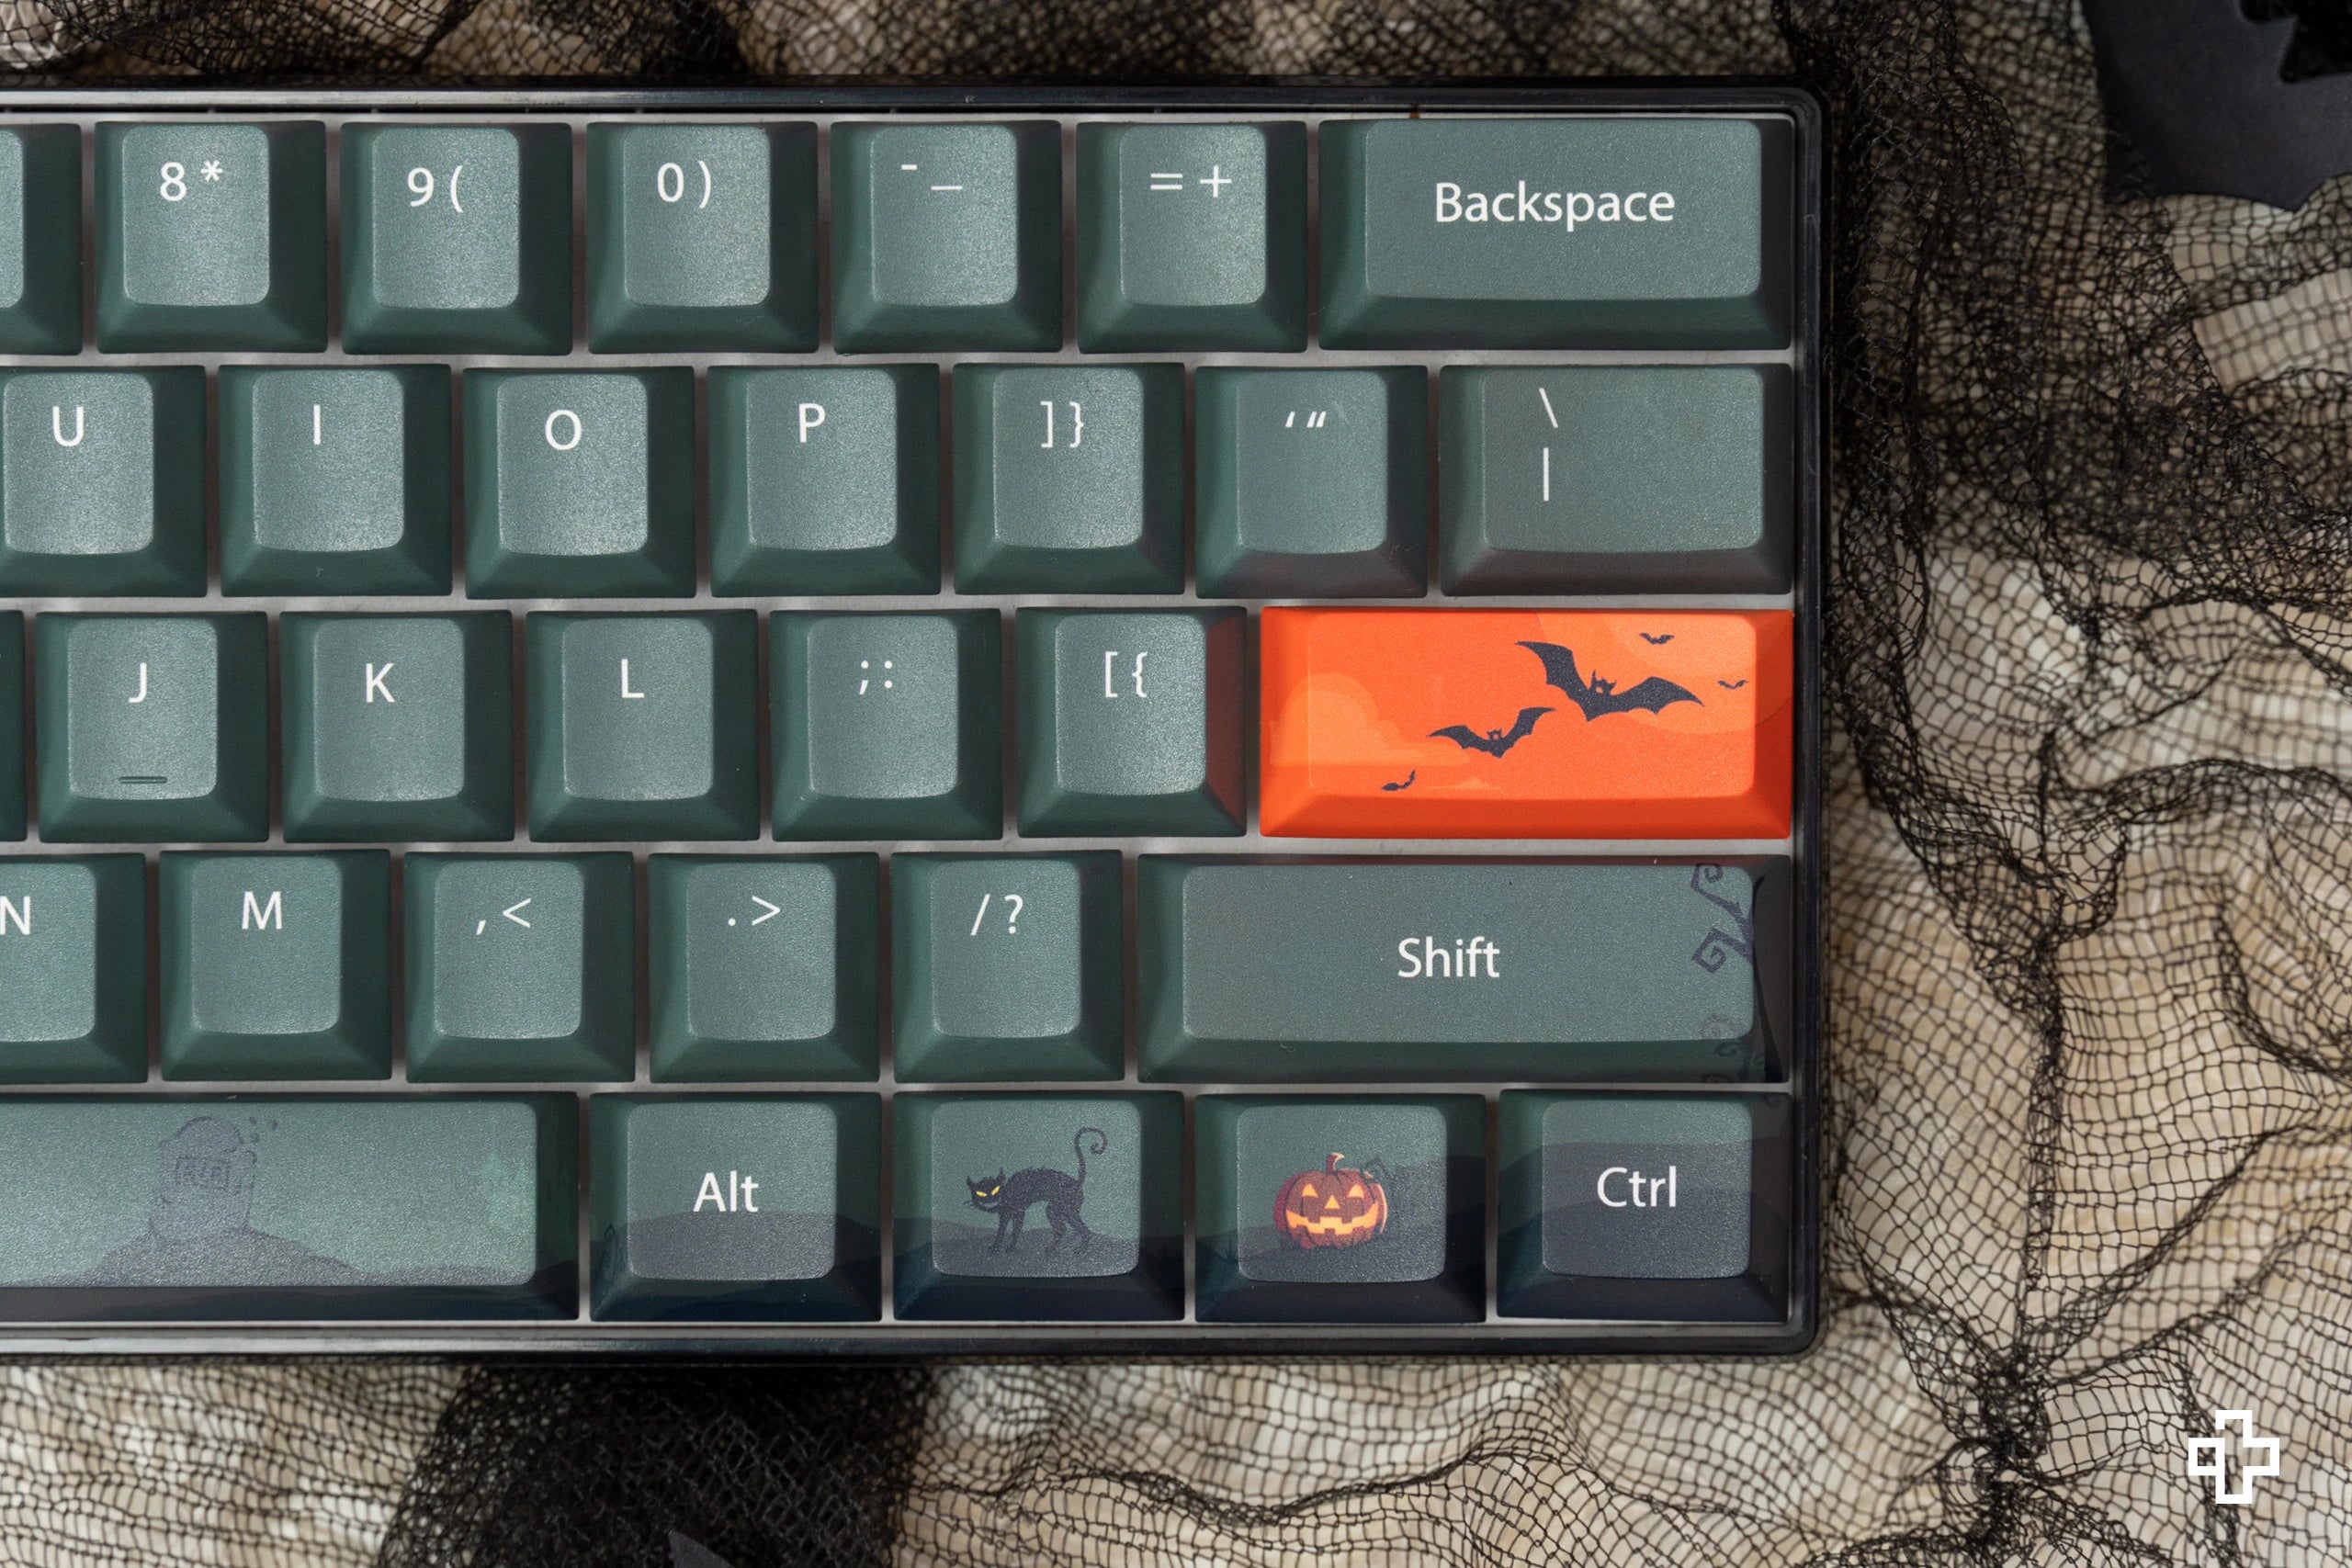 QwertyKey Halloween LIMITED EDITION key set Cherry profile Material PBT